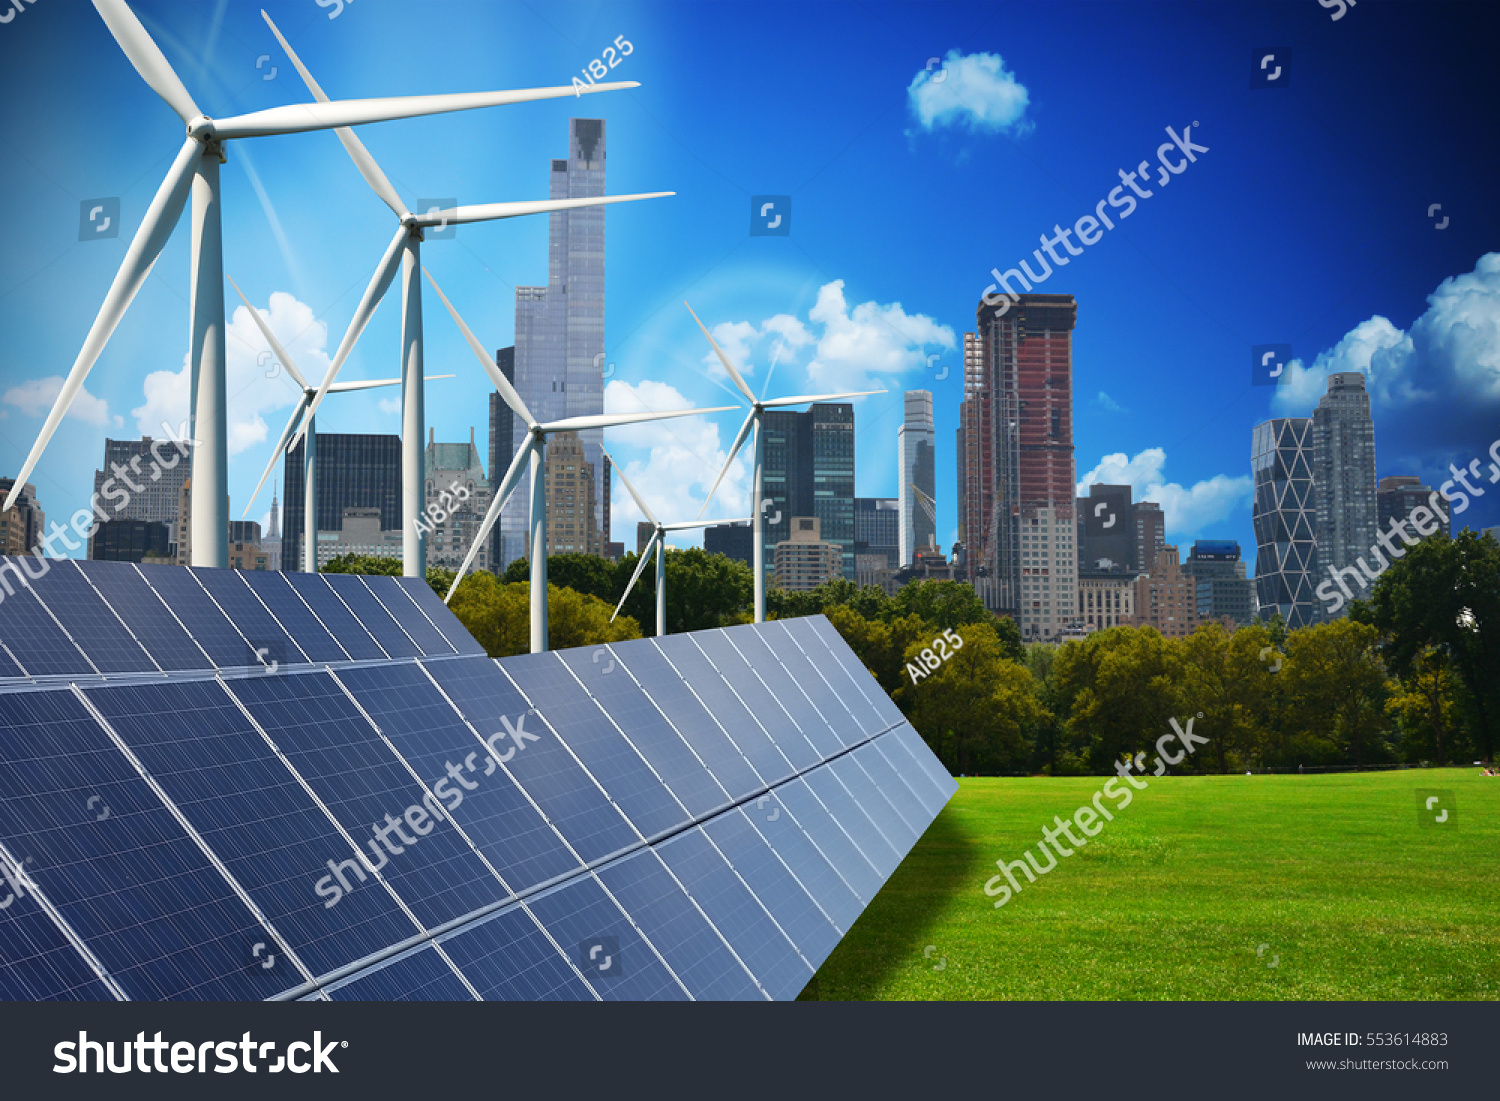 Modern green city powered only by renewable energy sources concept #553614883